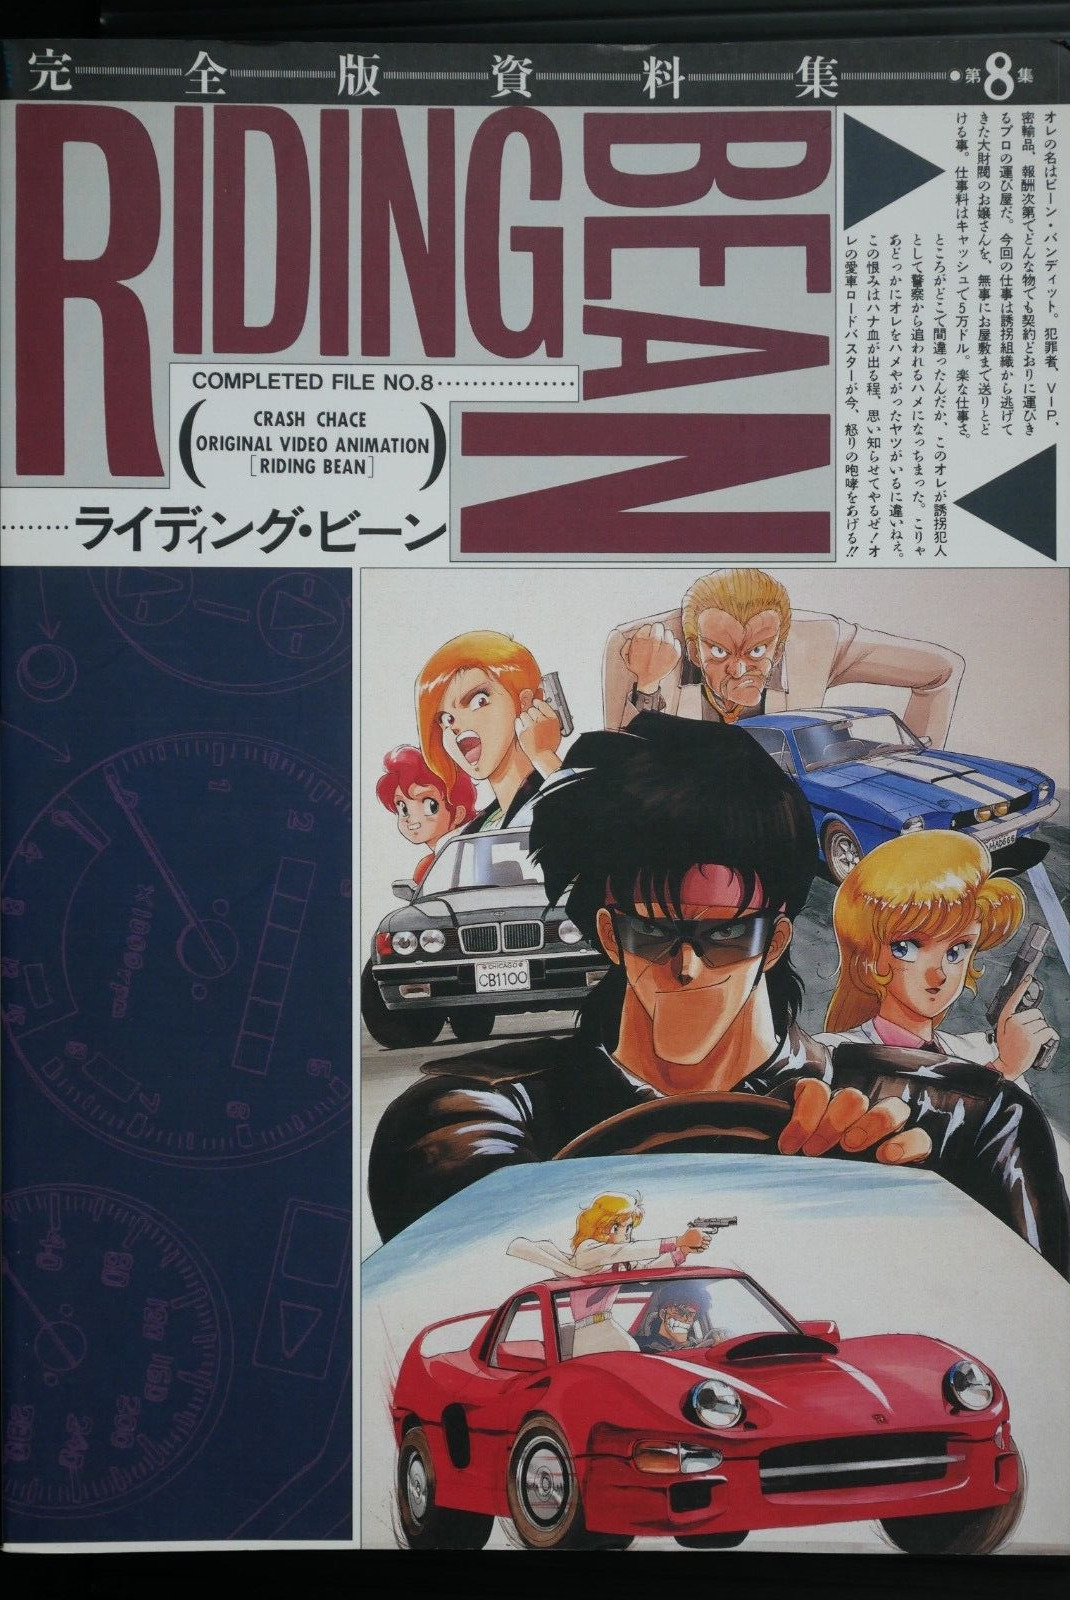 OVA 'Riding Bean' Completed File Book - Kenichi Sonoda - from JAPAN